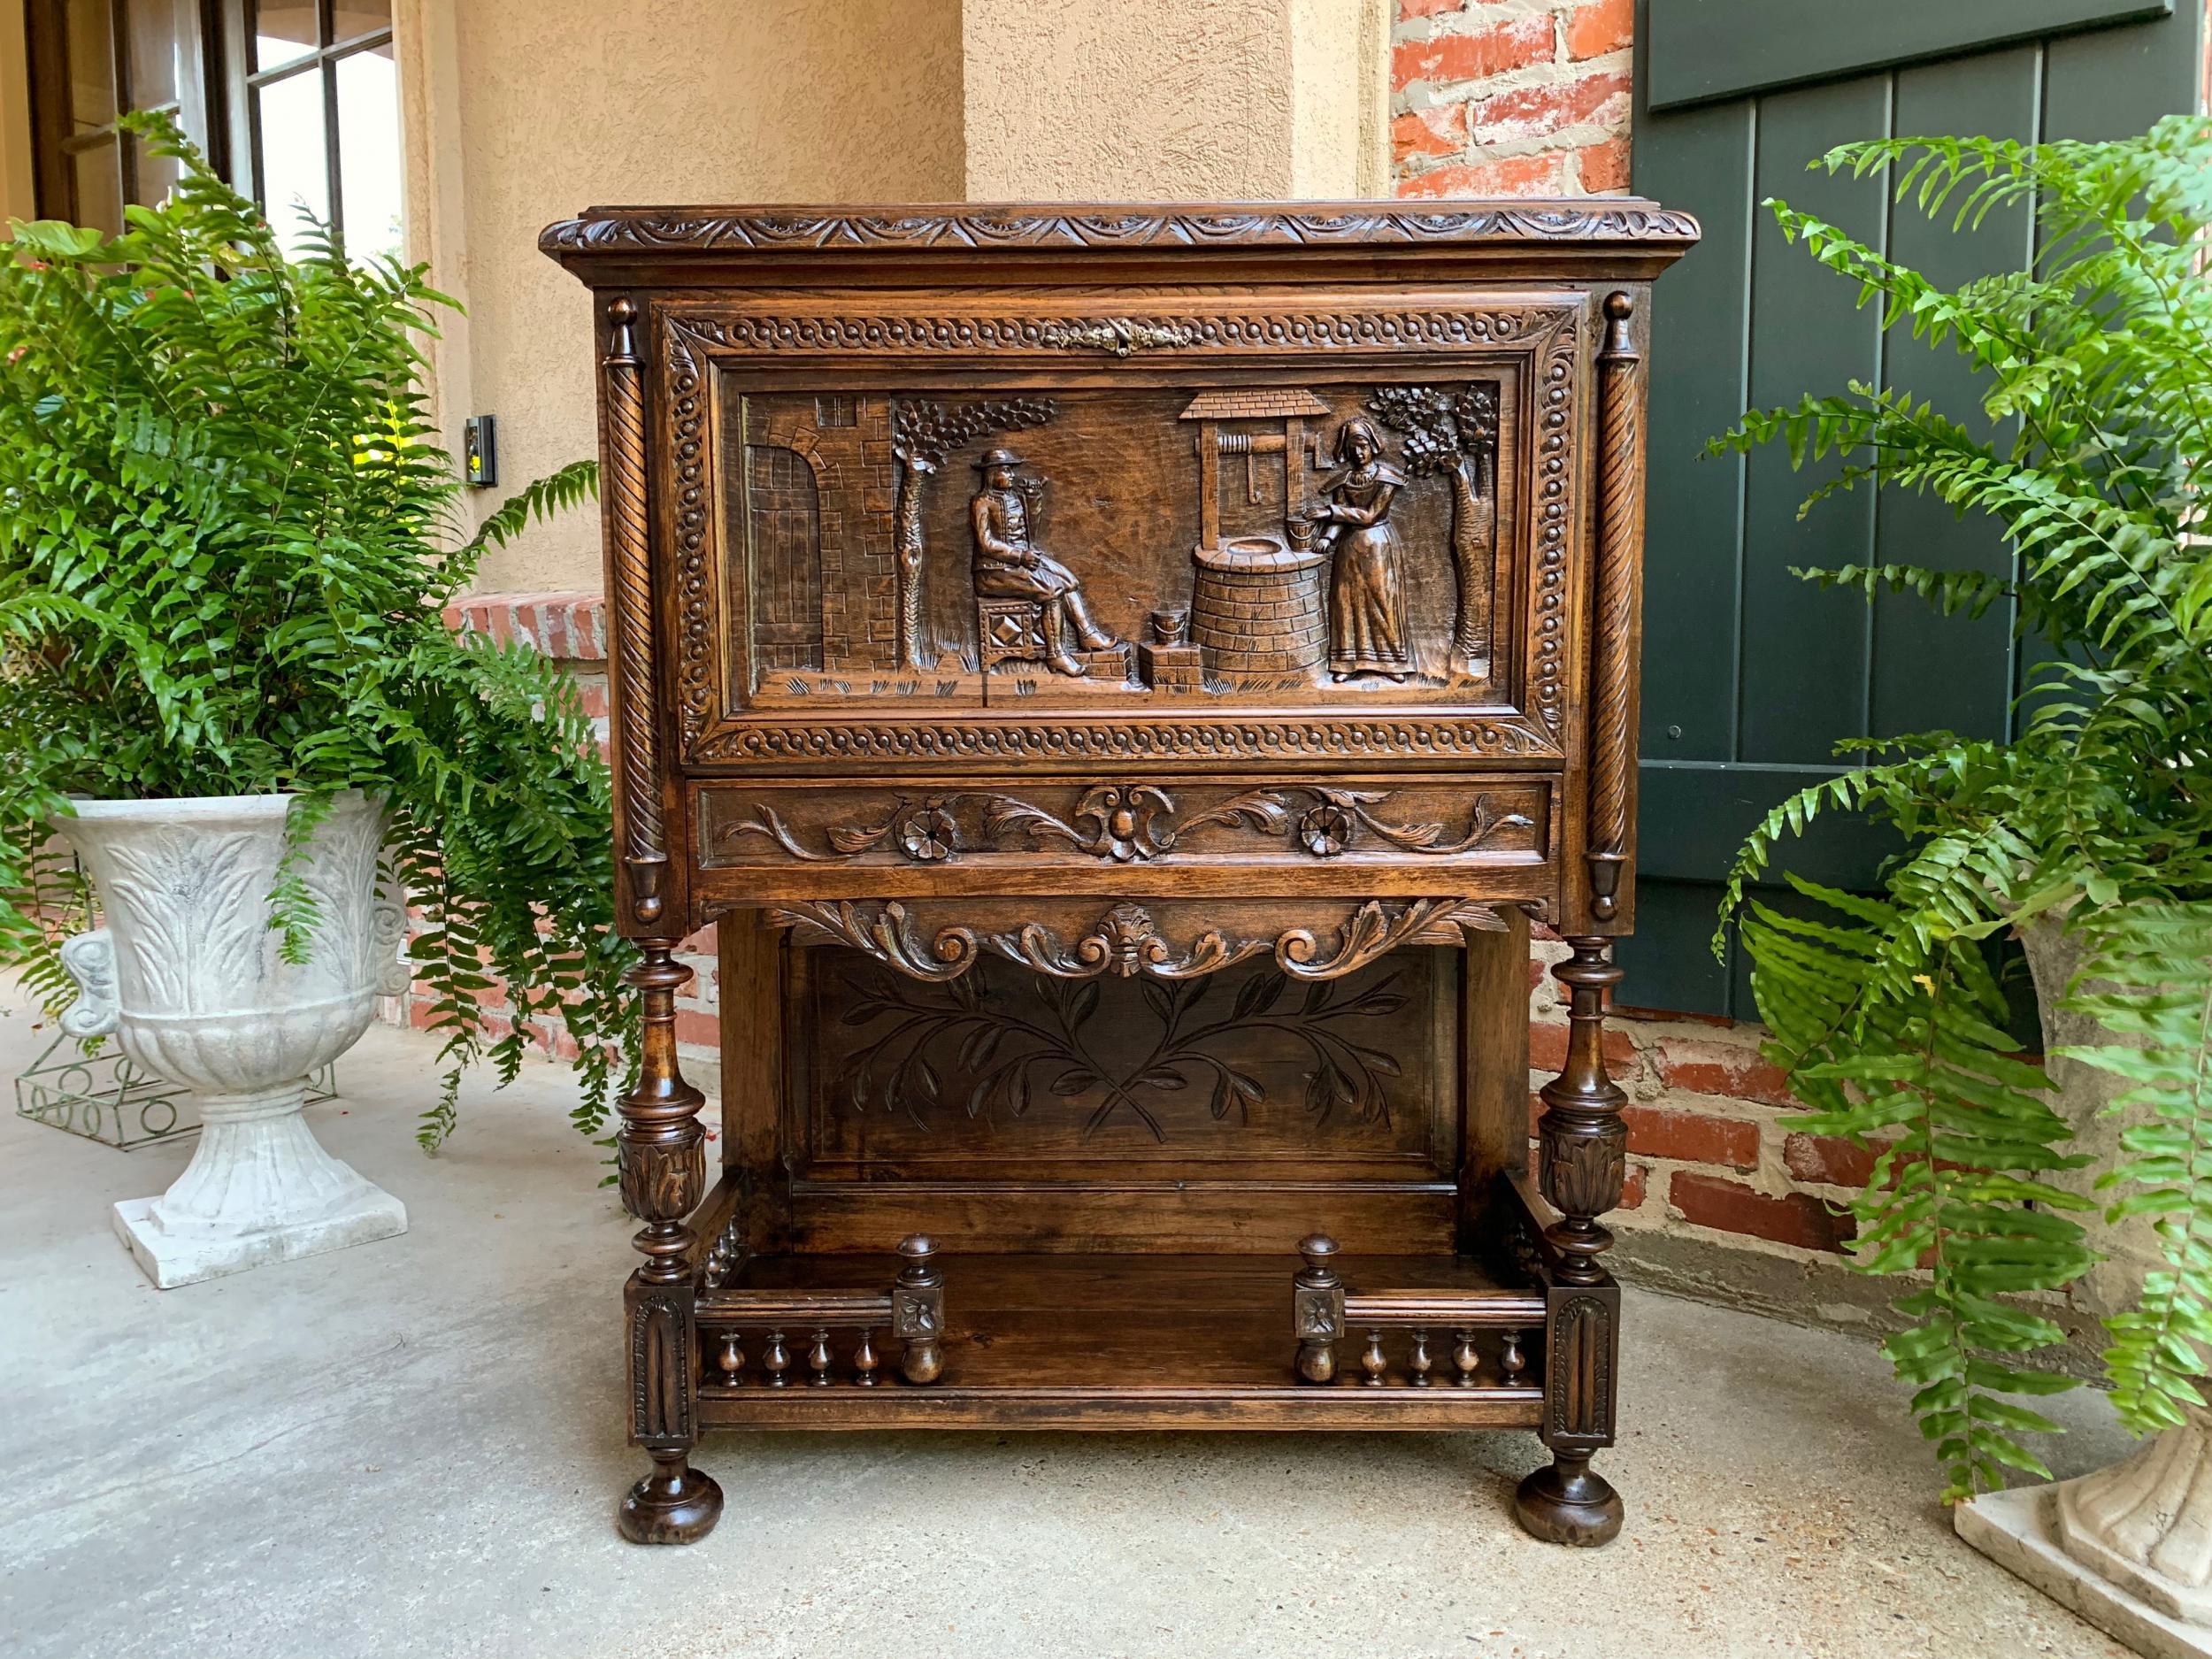 Antique French carved oak drop front desk liquor cabinet Breton Brittany 19th c

~Direct from France~
19th century French cabinet with stunning Brittany carvings throughout. Perfect for a storage piece, excellent as a writing desk, with it’s drop